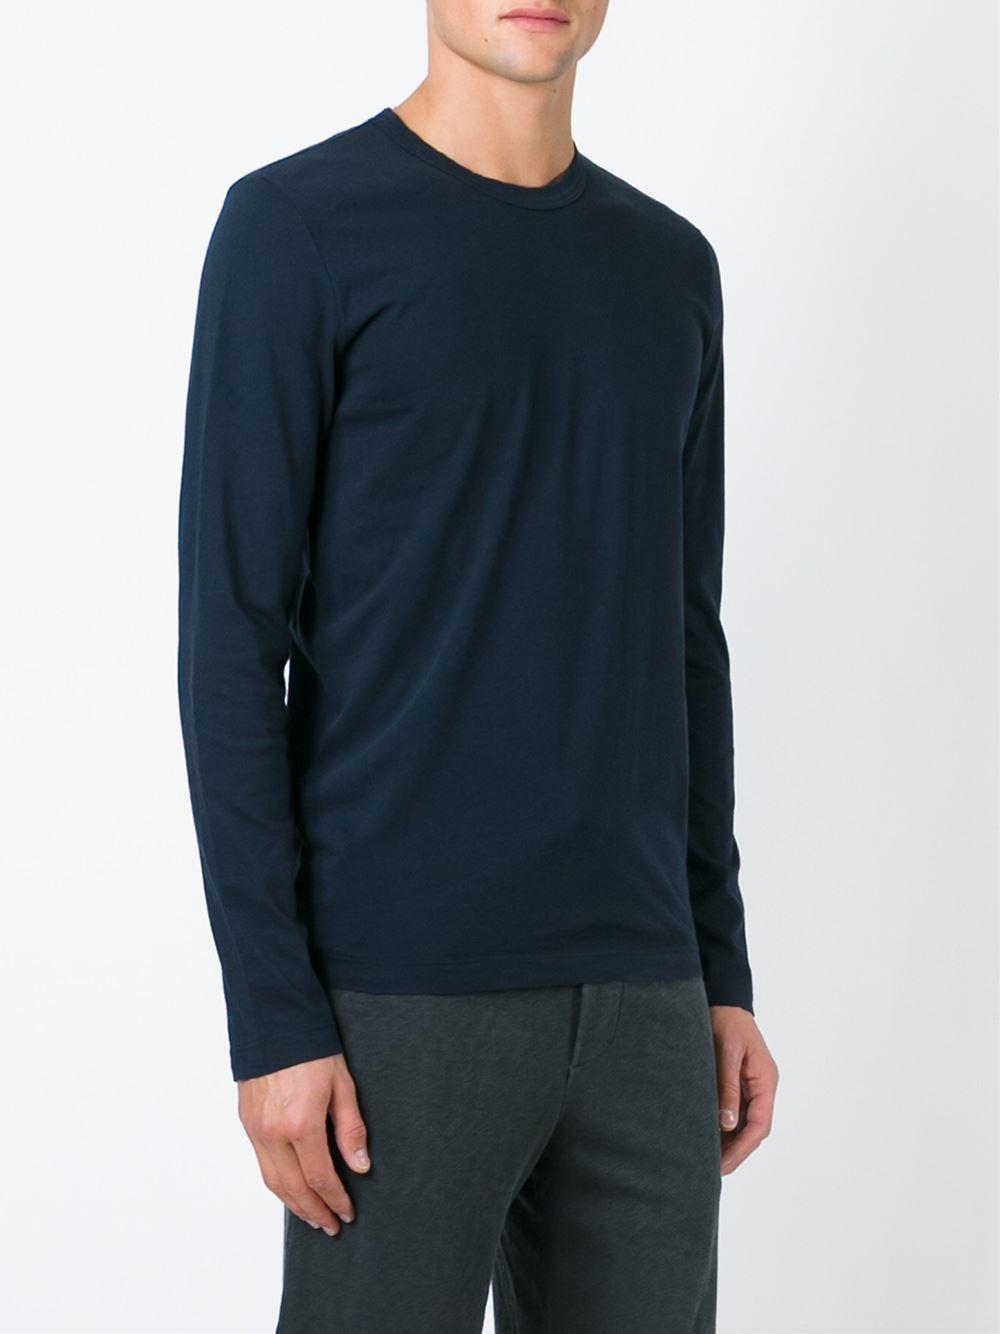 Lyst - James Perse Long Sleeve T-shirt in Blue for Men